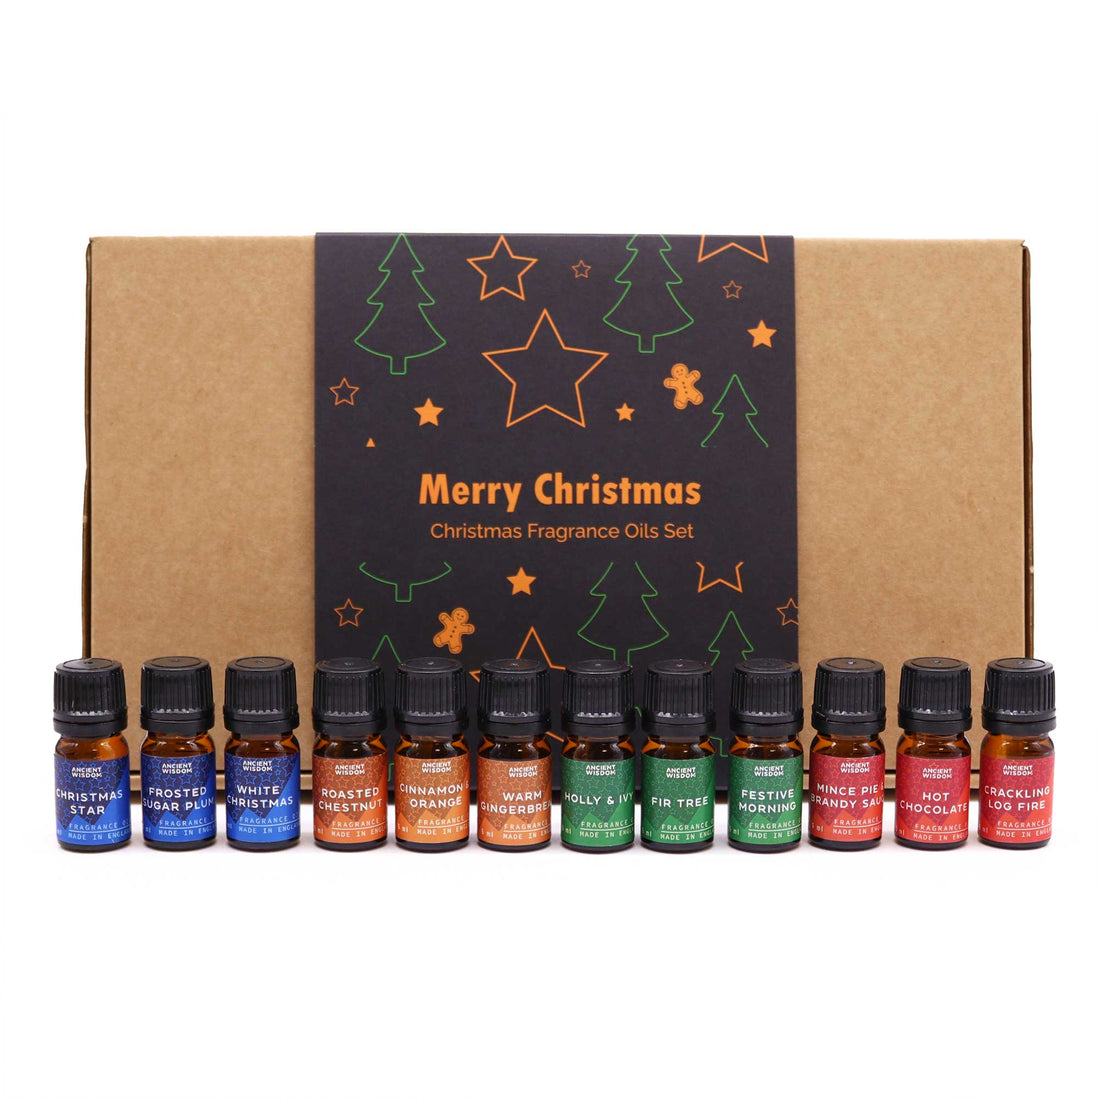 Holy Scents of Christmas Fragrance Set - best price from Maltashopper.com XFOSET-01